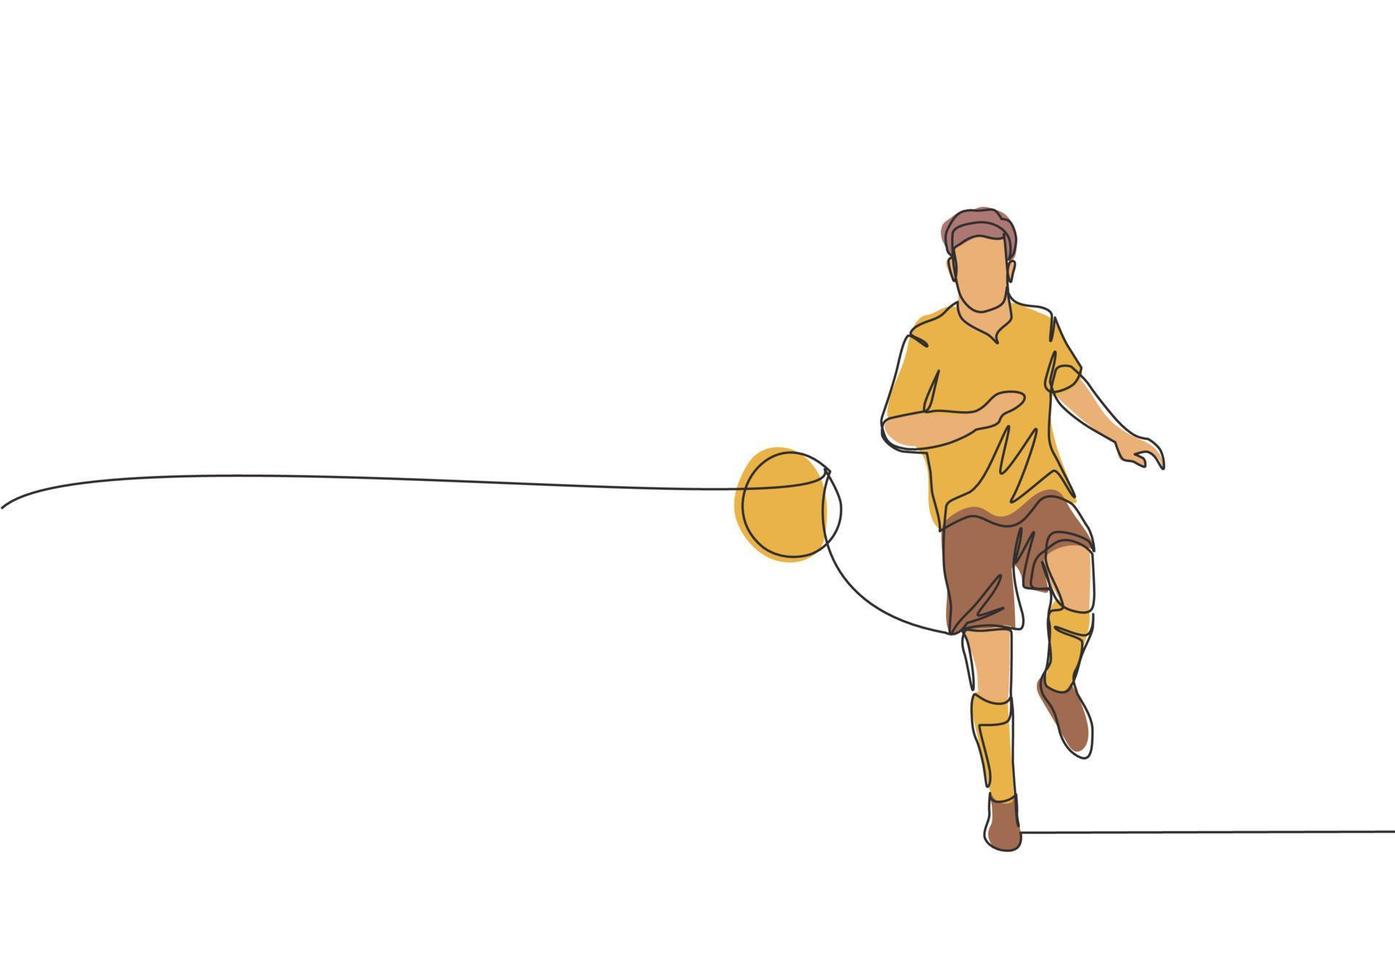 One single line drawing of young happy football player with short sleeve calmly controlling the ball passed to him. Soccer match sports concept. Continuous line draw design vector illustration